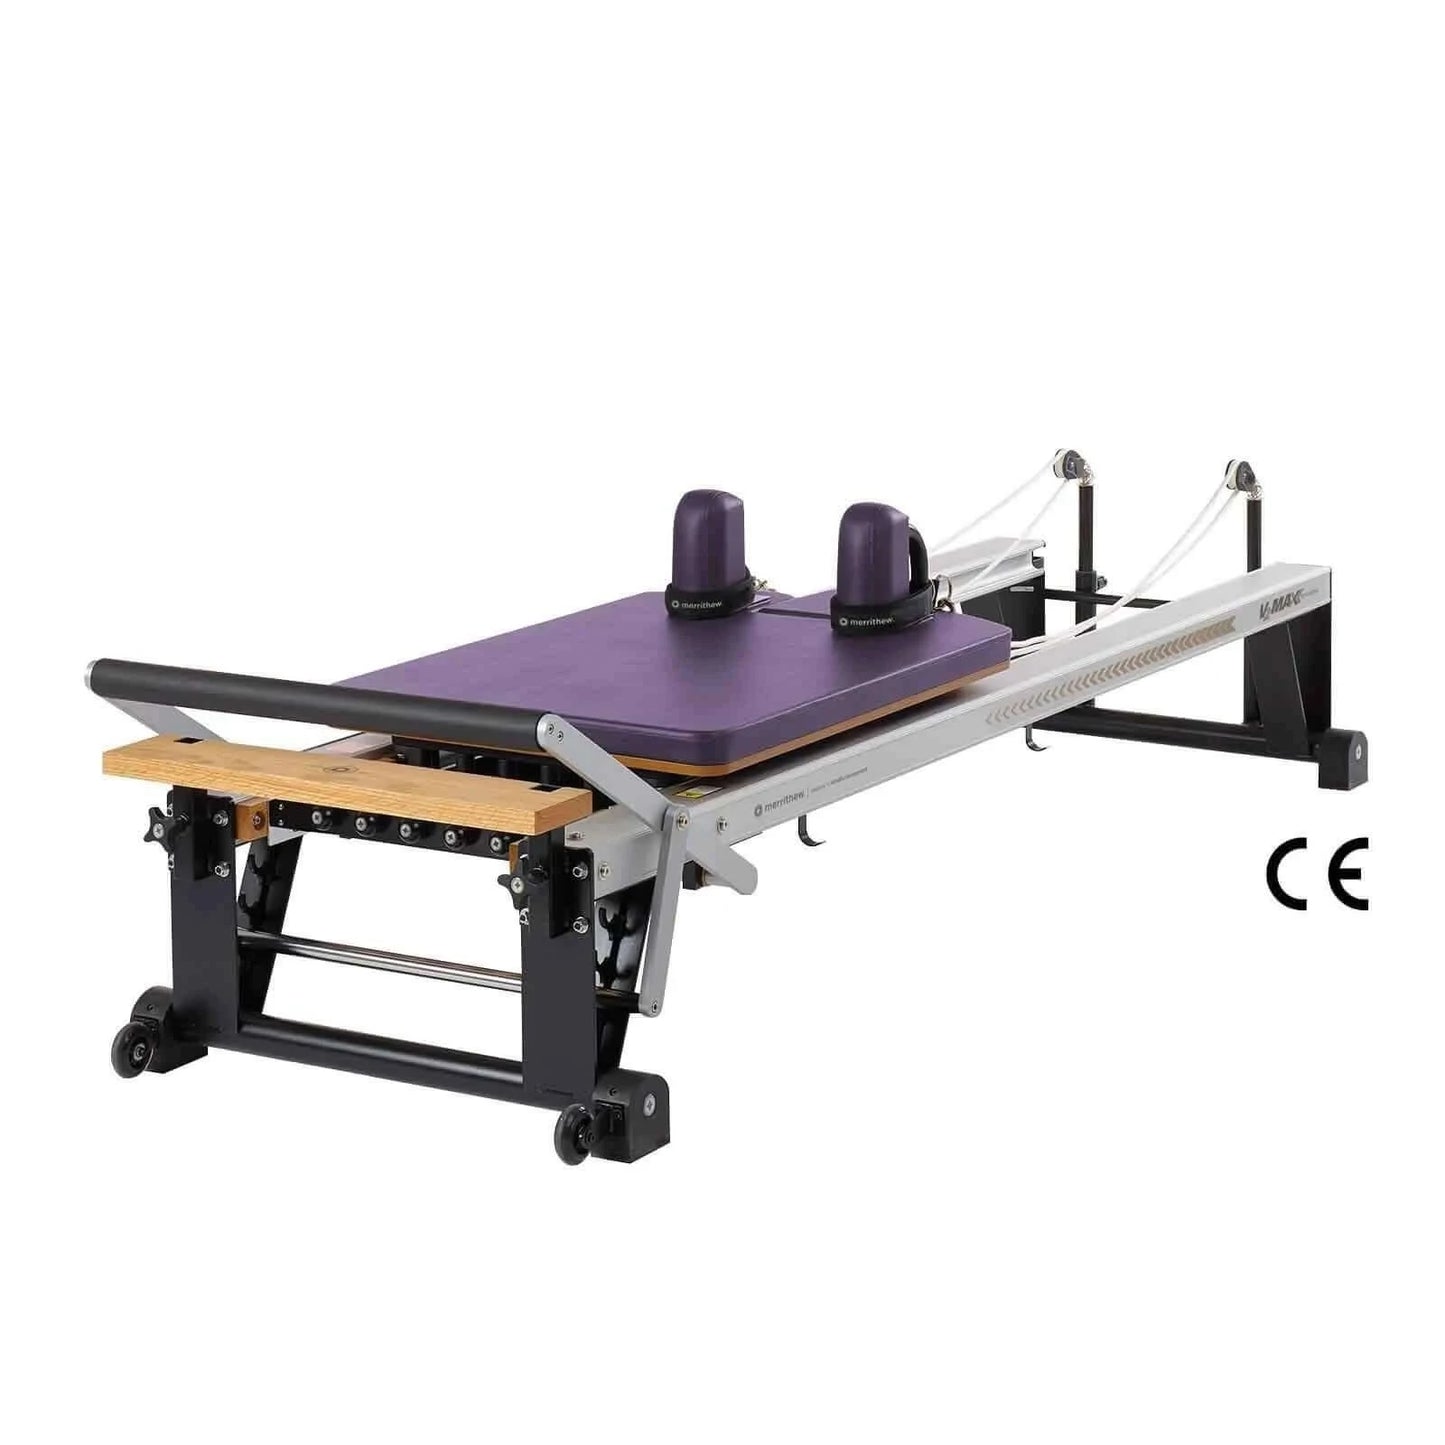 Purple Impulse Merrithew™ Pilates Reformer Extension Upgrade · V2 Max™ by Merrithew™ sold by Pilates Matters® by BSP LLC